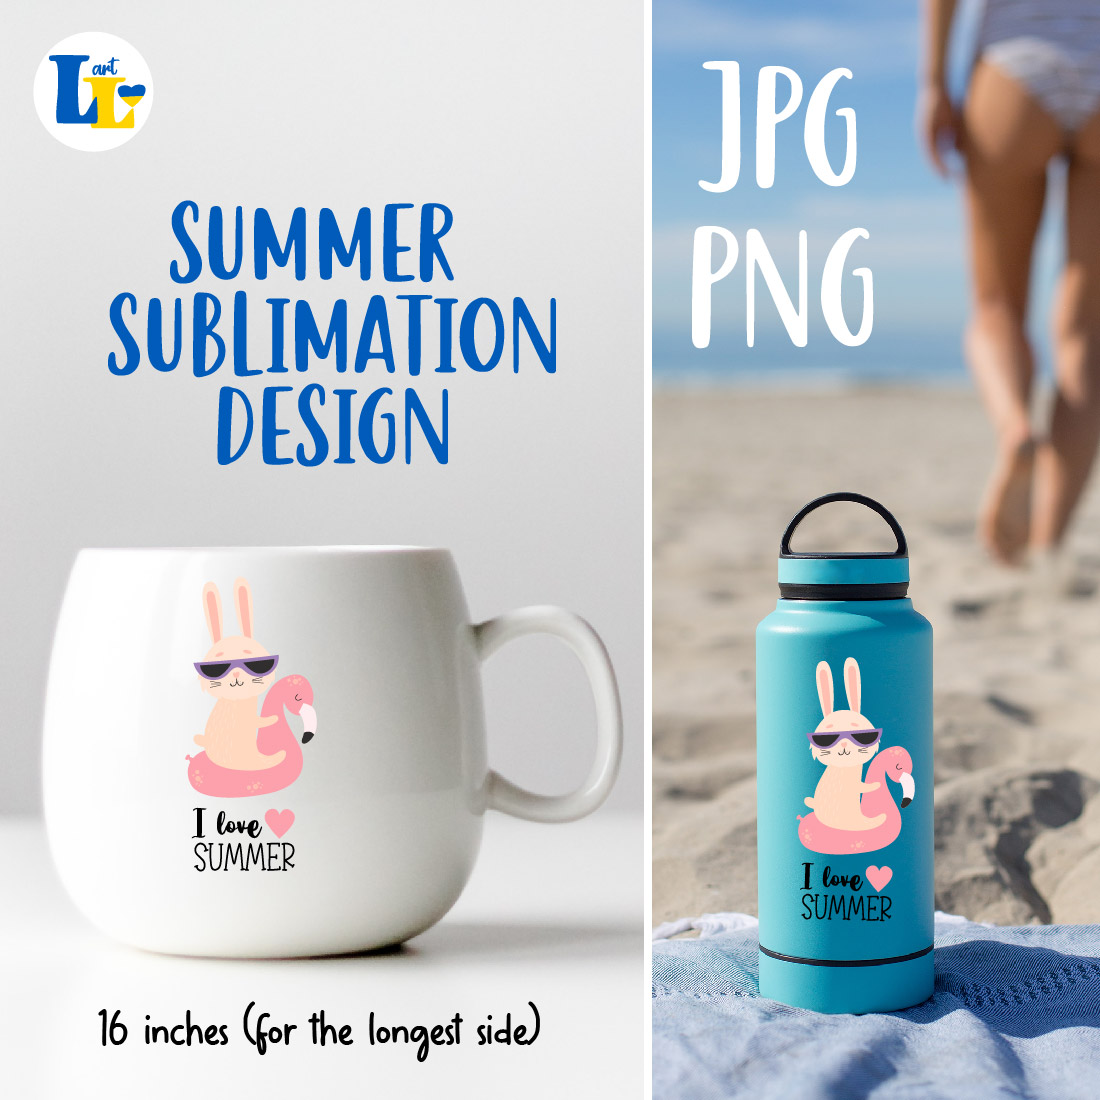 Beach Bunny Or Cute Summer Rabbit Sublimation Design Preview Image.